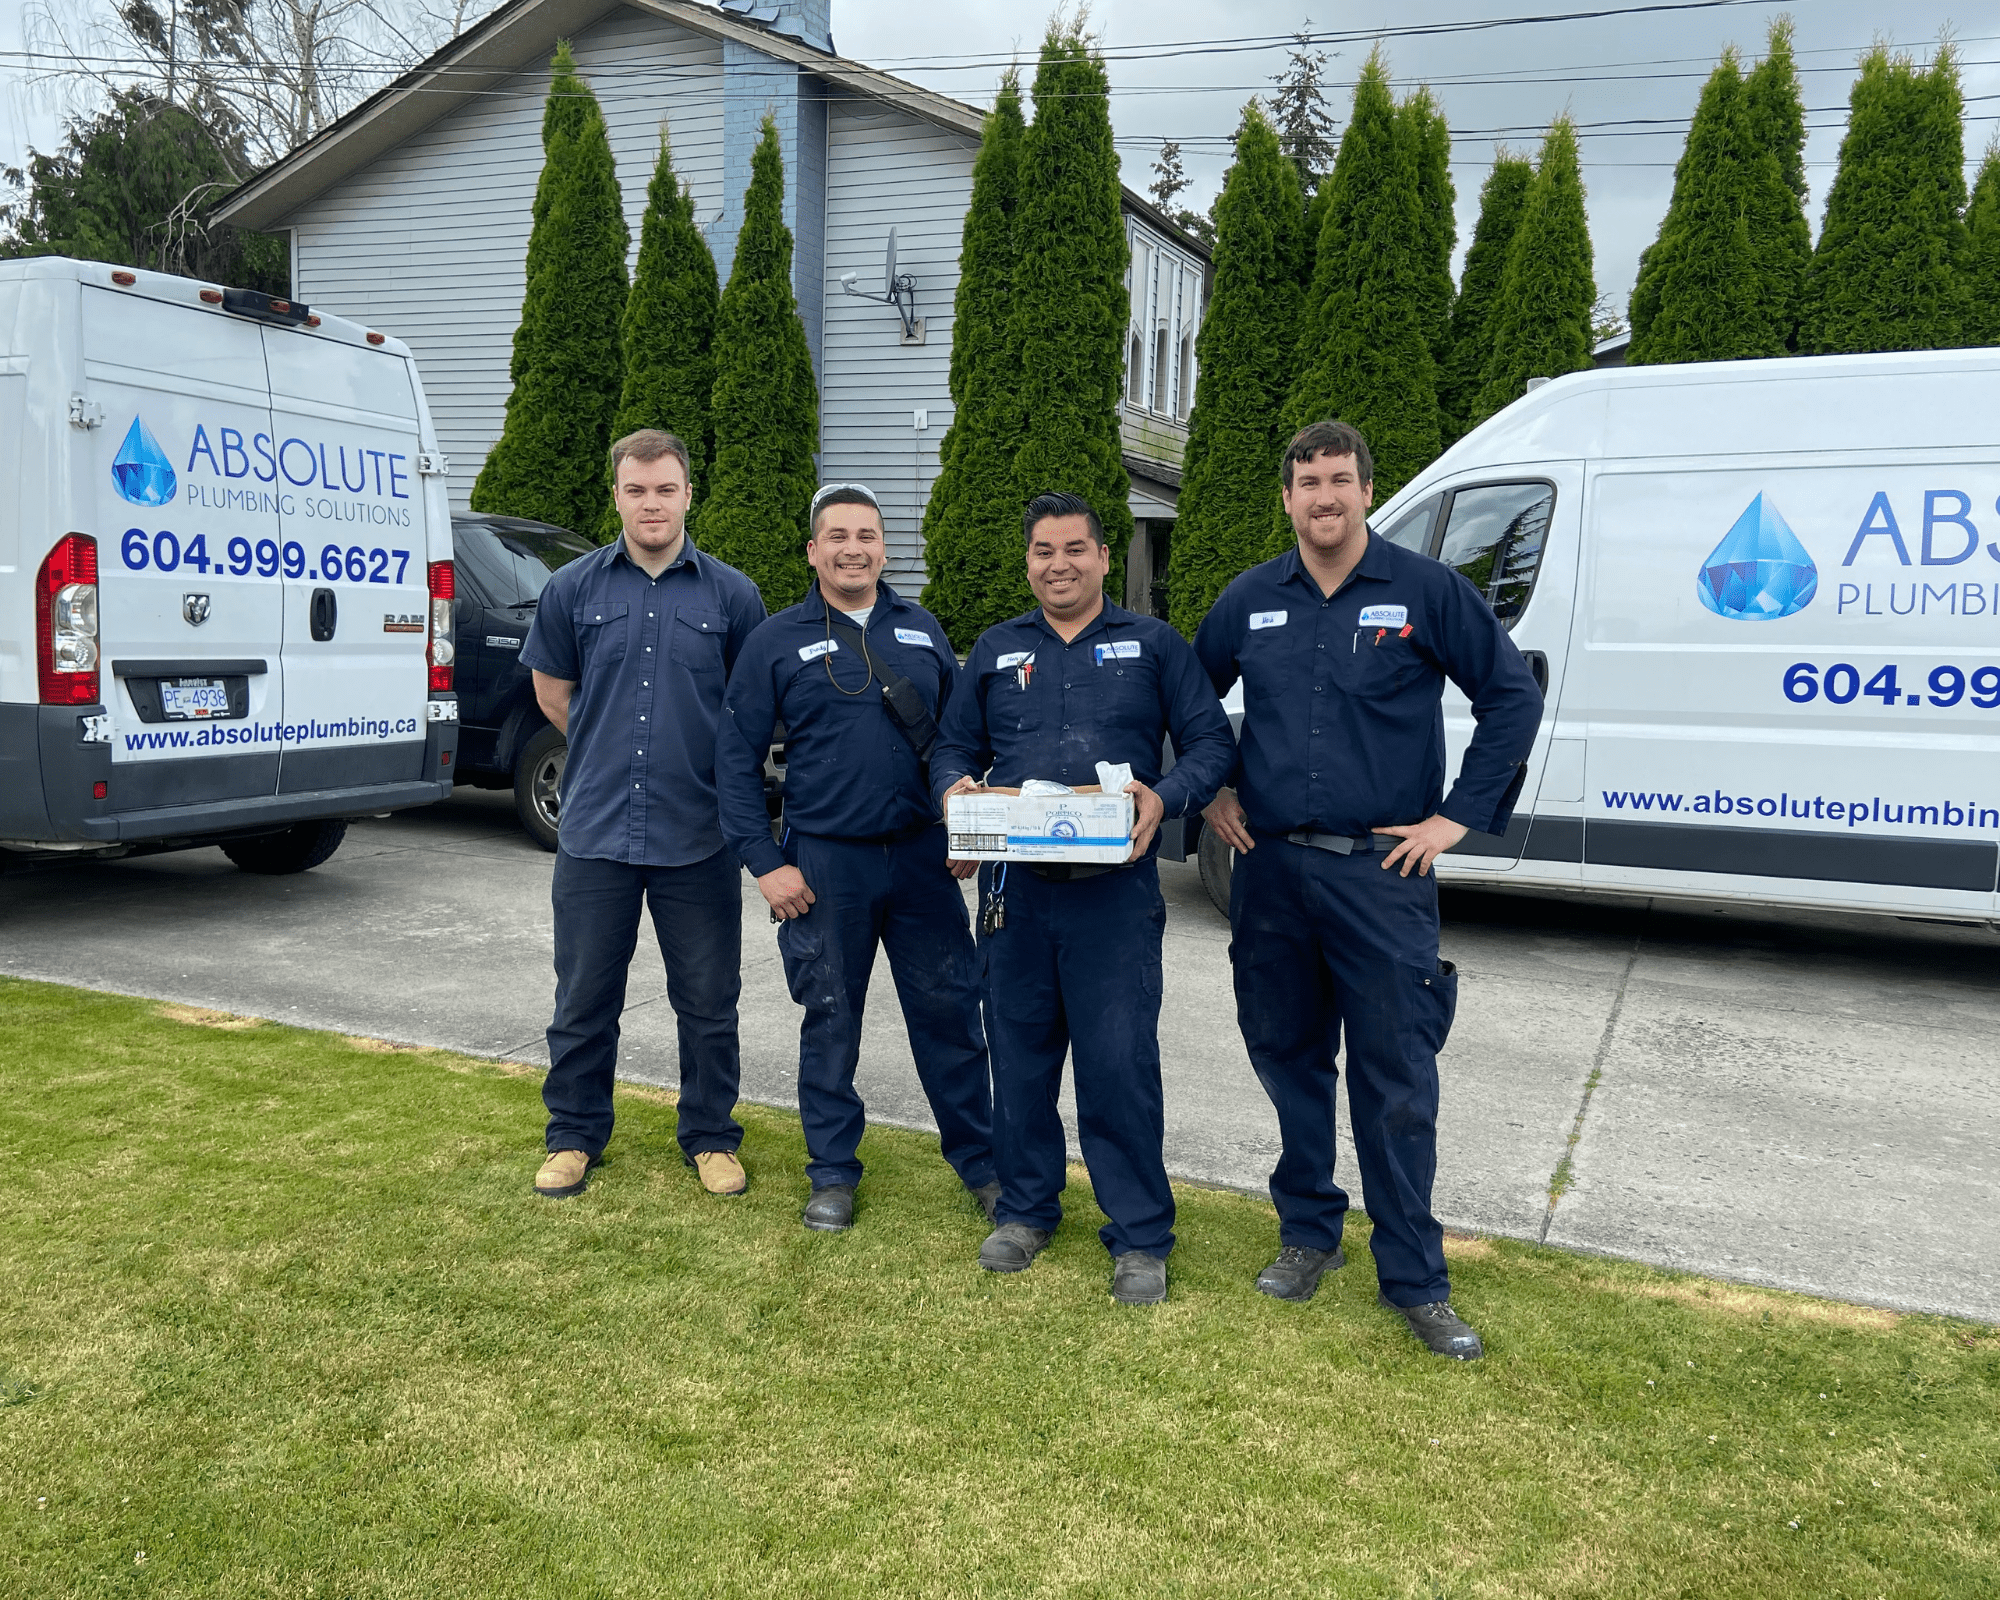 For a quote on  Furnace installation or repair in Ladner BC, call Absolute Plumbing Solutions!